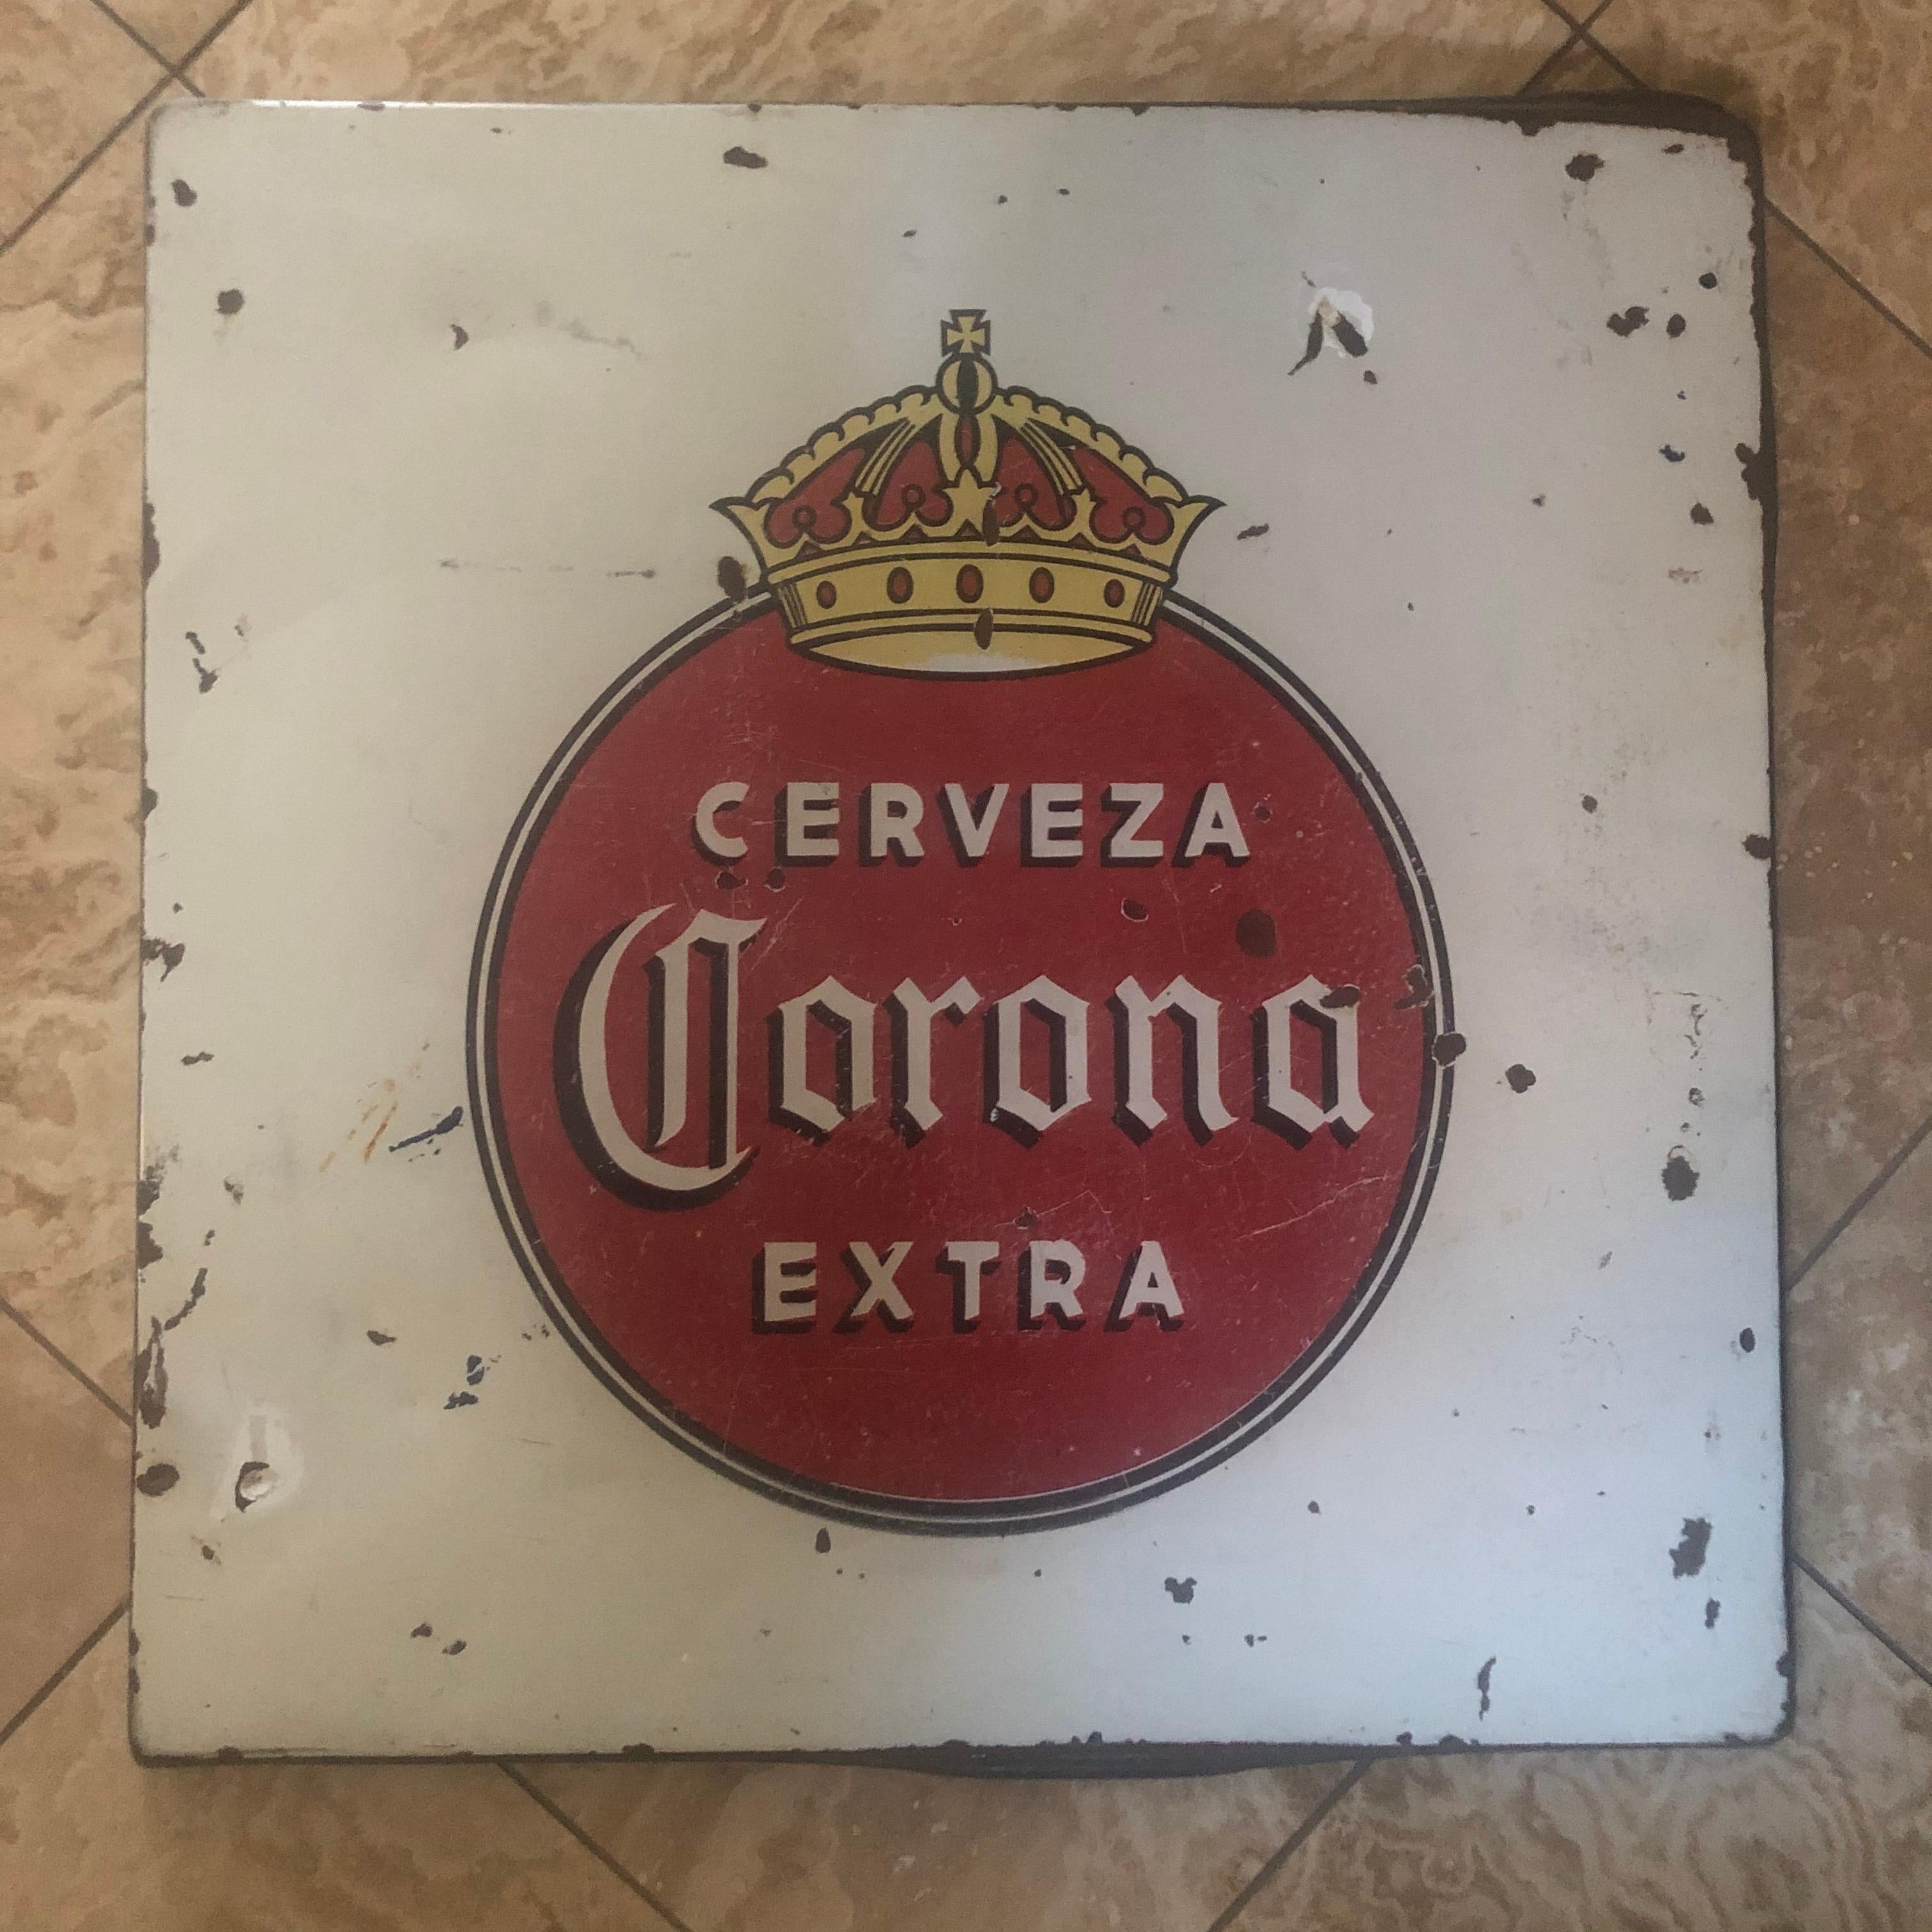 Super cool and hard to find vintage porcelain Corona beer sign, circa 1970s. The sign is actually a former table top at a roadside cantina in Mexico. The distressed look and vintage patina make this piece a great addition to any bar or game room!